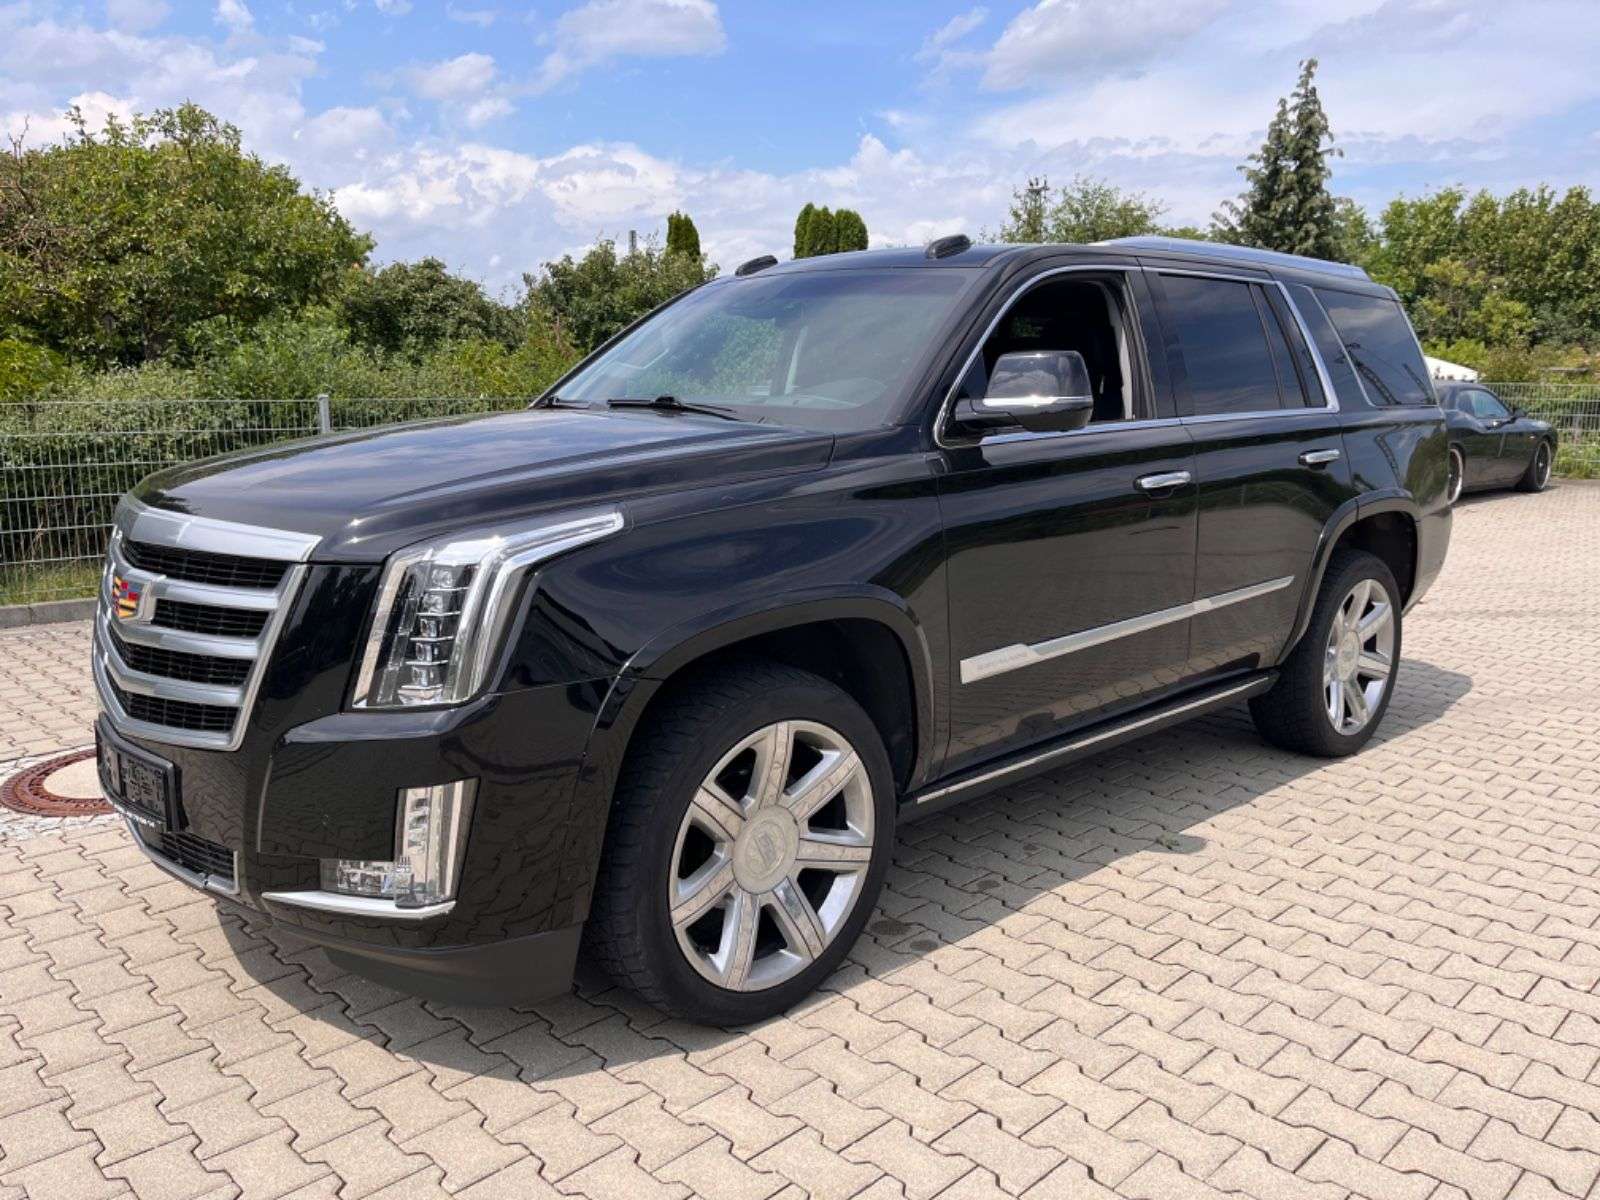 Cadillac Escalade Off-Road/Pick-up in Black used in München for € 58,999.-